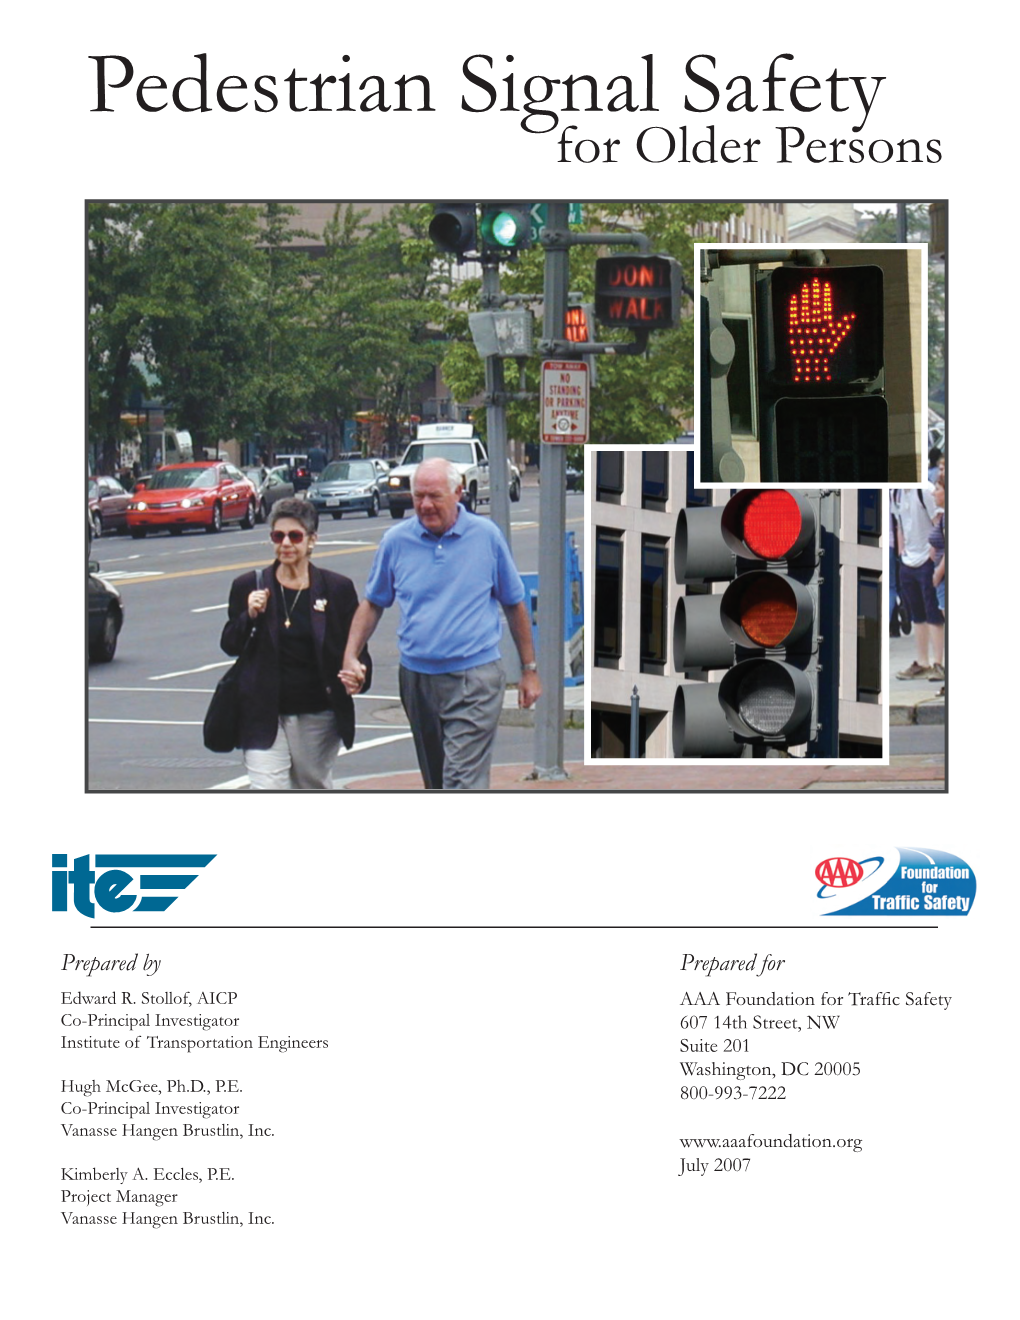 Pedestrian Signal Safety for Older Persons